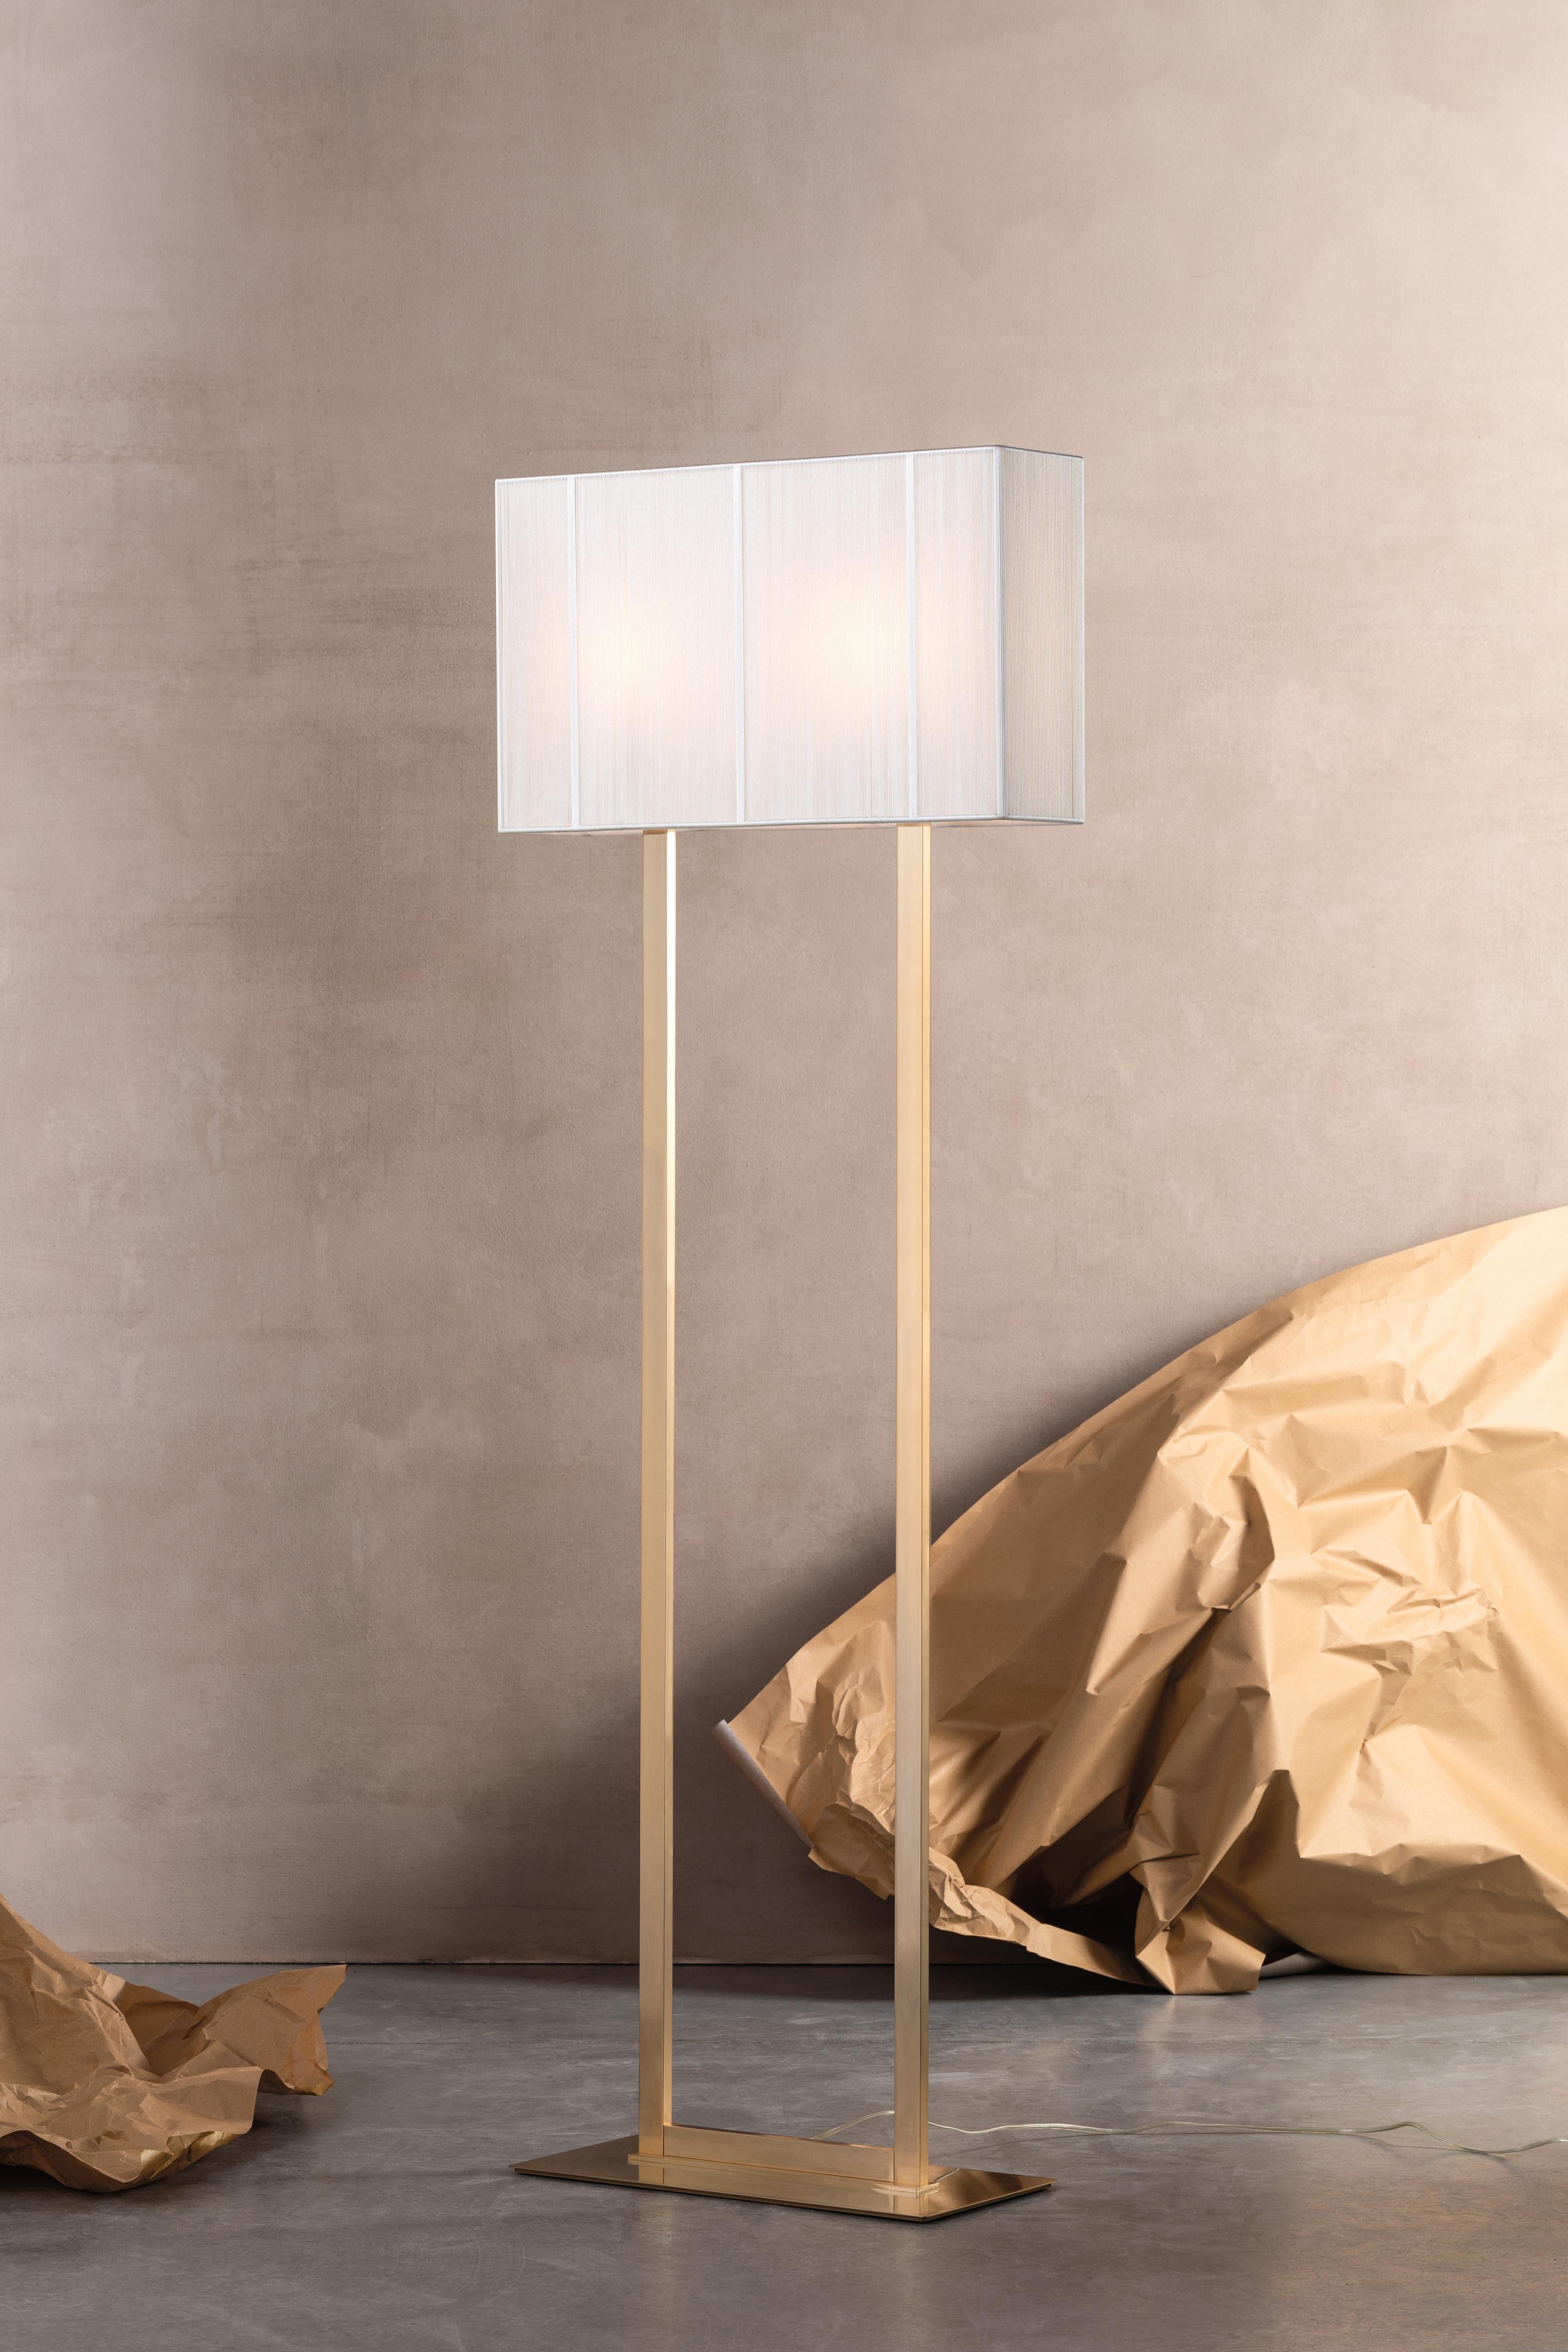 Axolight Clavius Medium Floor Lamp in White Lampshade and Chrome Finish by Manuel & Vanessa Vivian 

Admire the texture of a precious hand-made silken thread lampshade. Clavius expresses its refined elegance by radiating softness and atmosphere